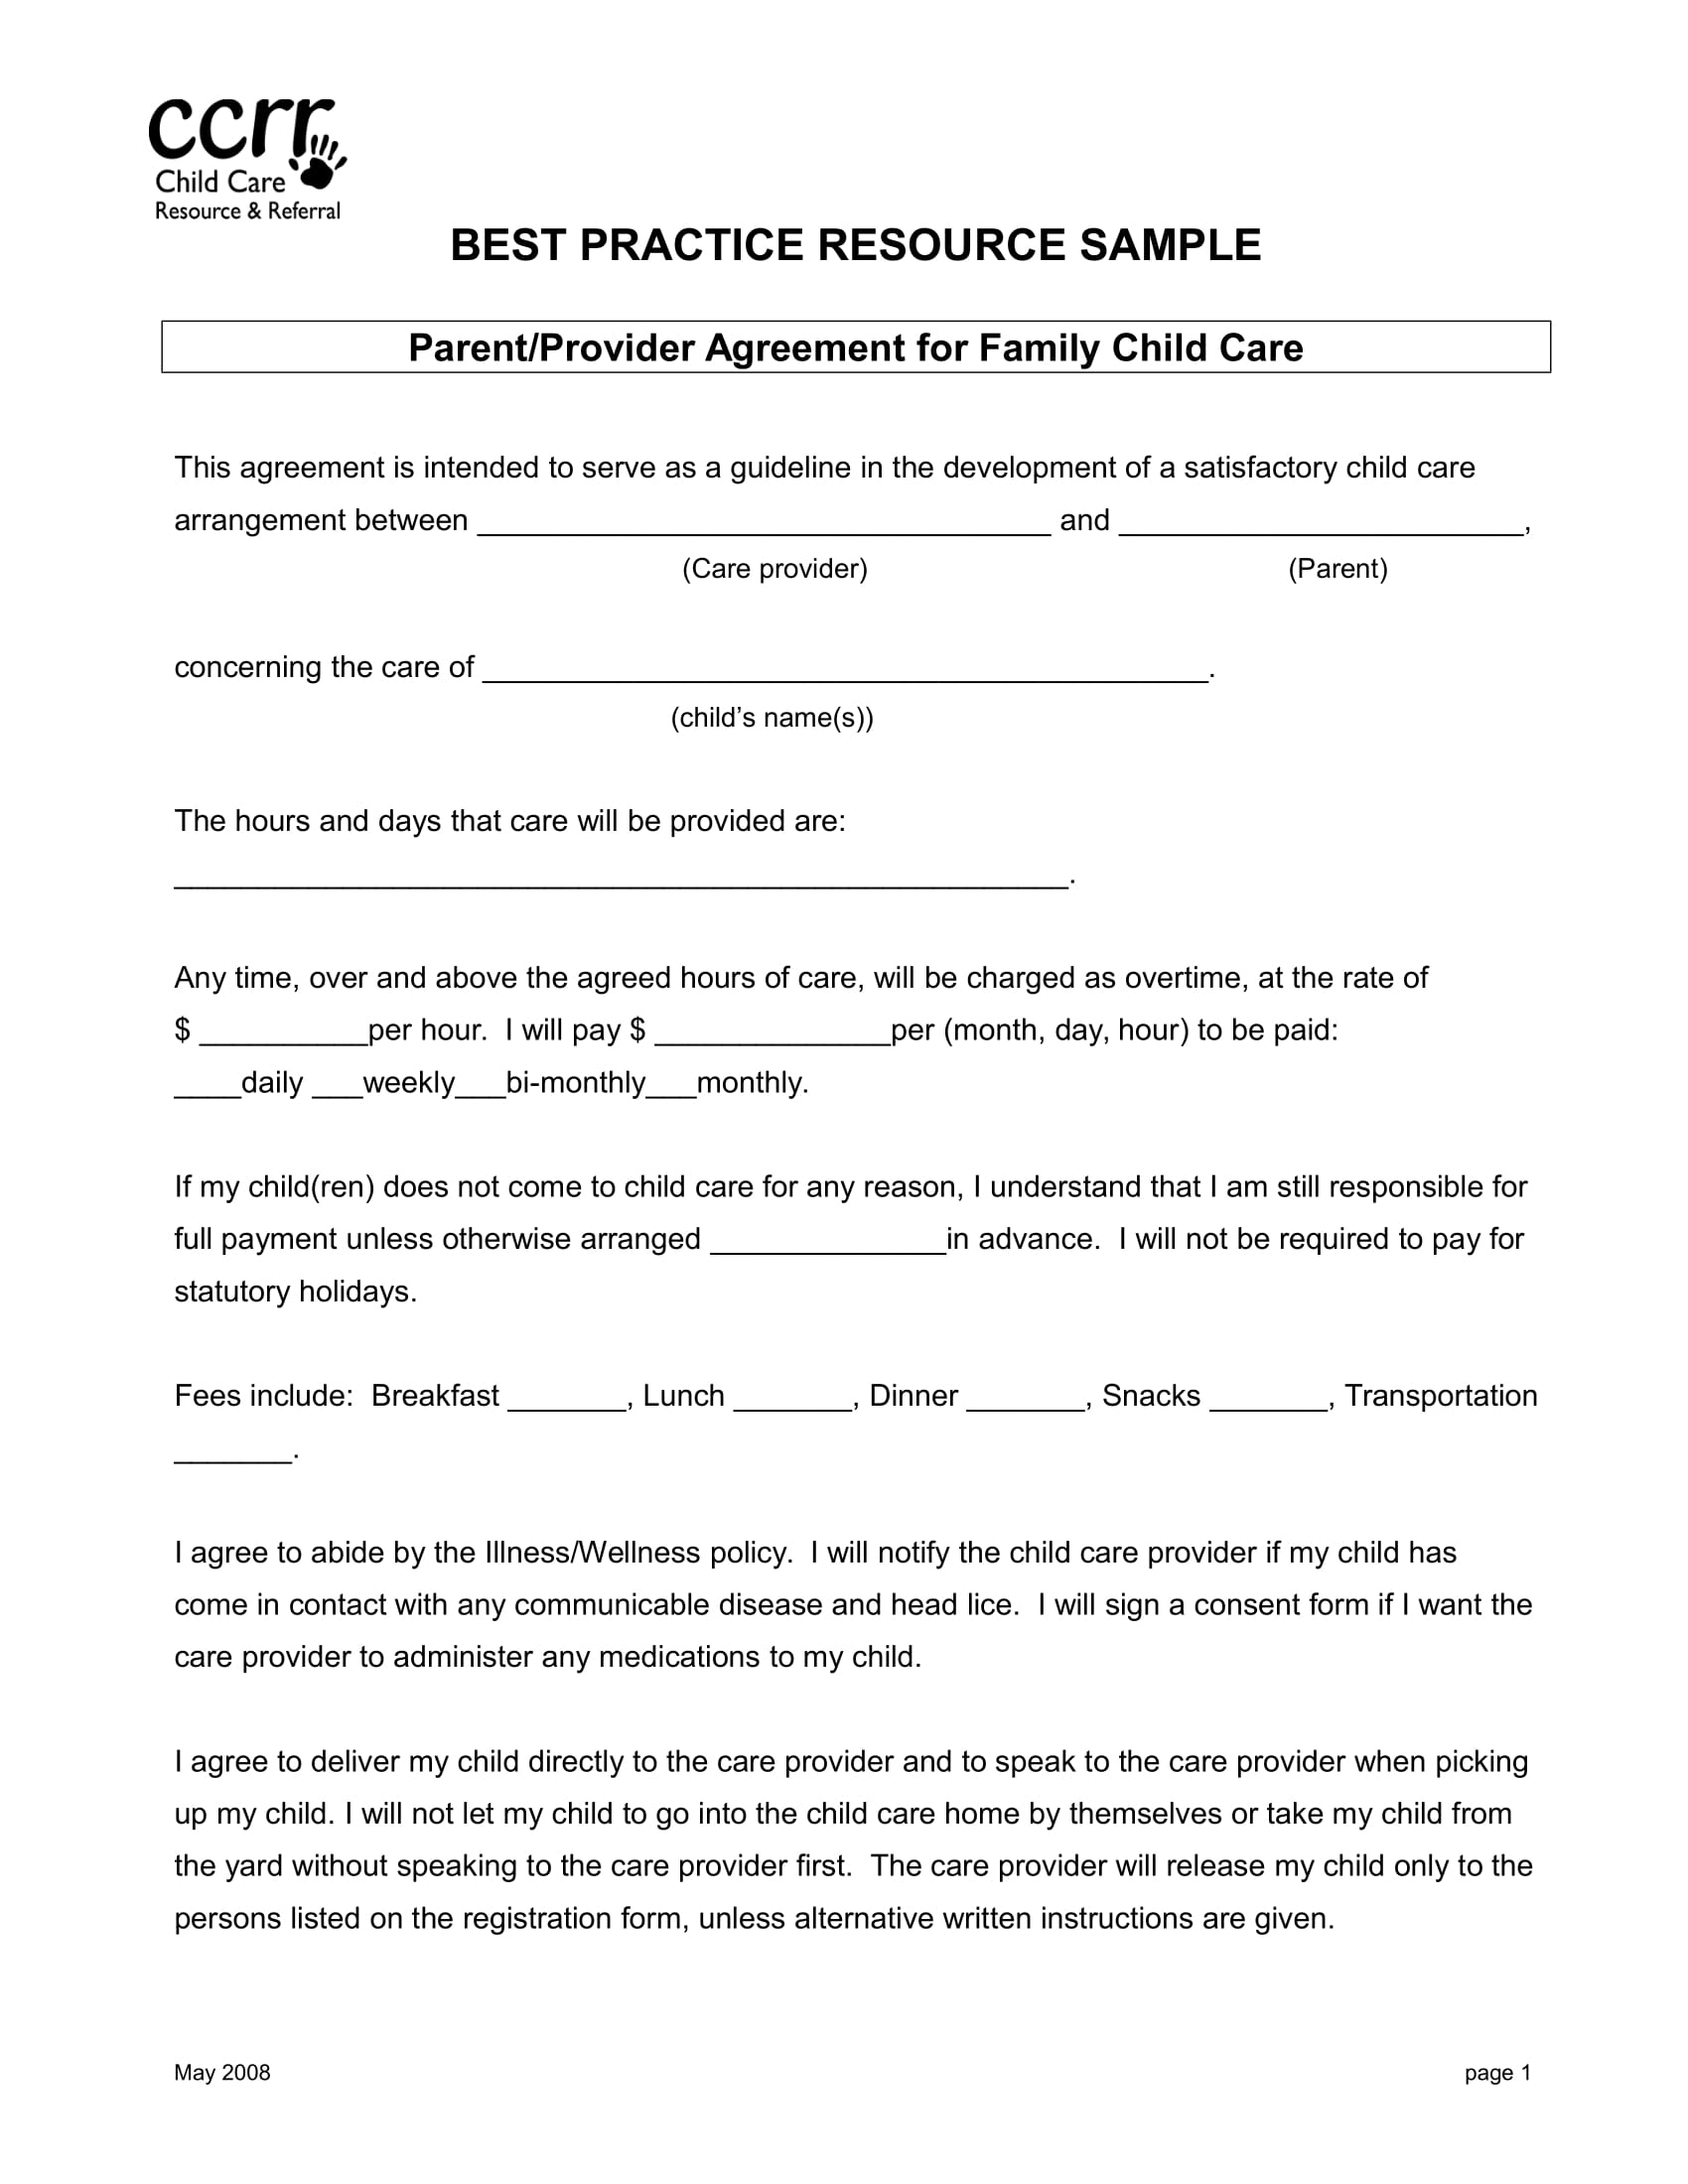 Parent Child Care Provider Agreement 8 Child Care Contract Example Templates Docs Word Pages Examples